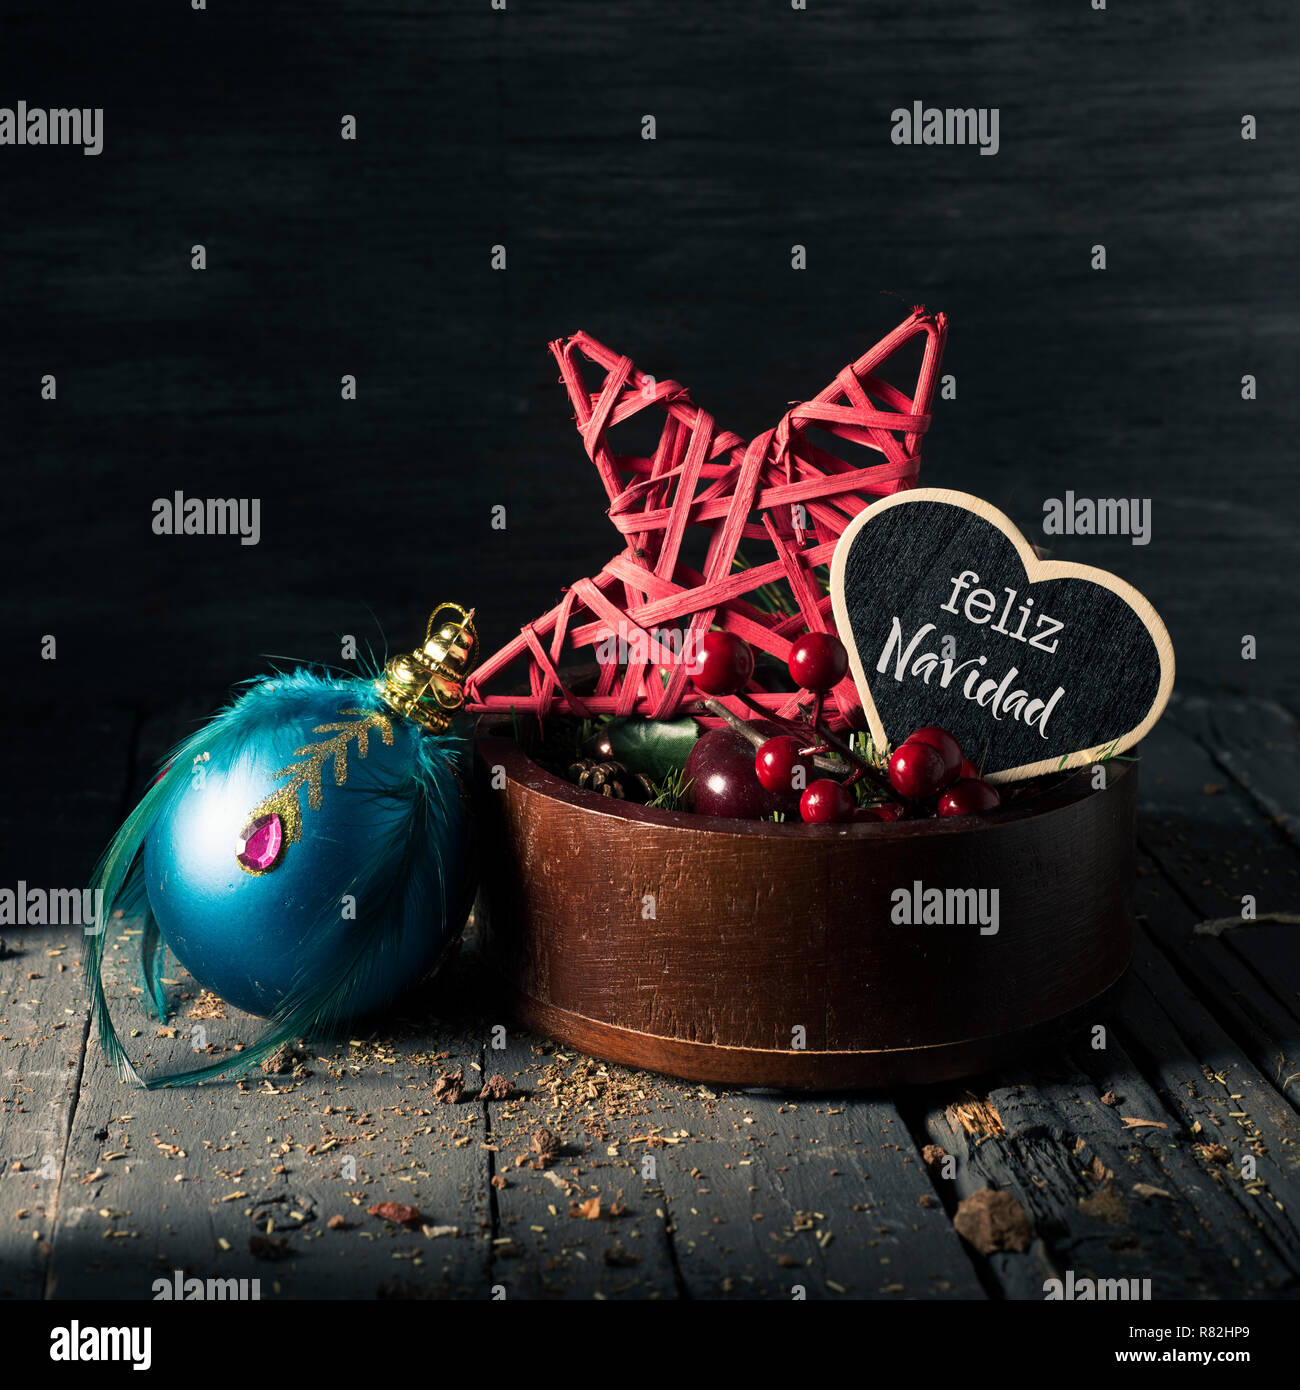 some cozy christmas ornaments in a wooden tray and a heart-shaped black signboard with the text feliz navidad, merry christmas written in spanish Stock Photo